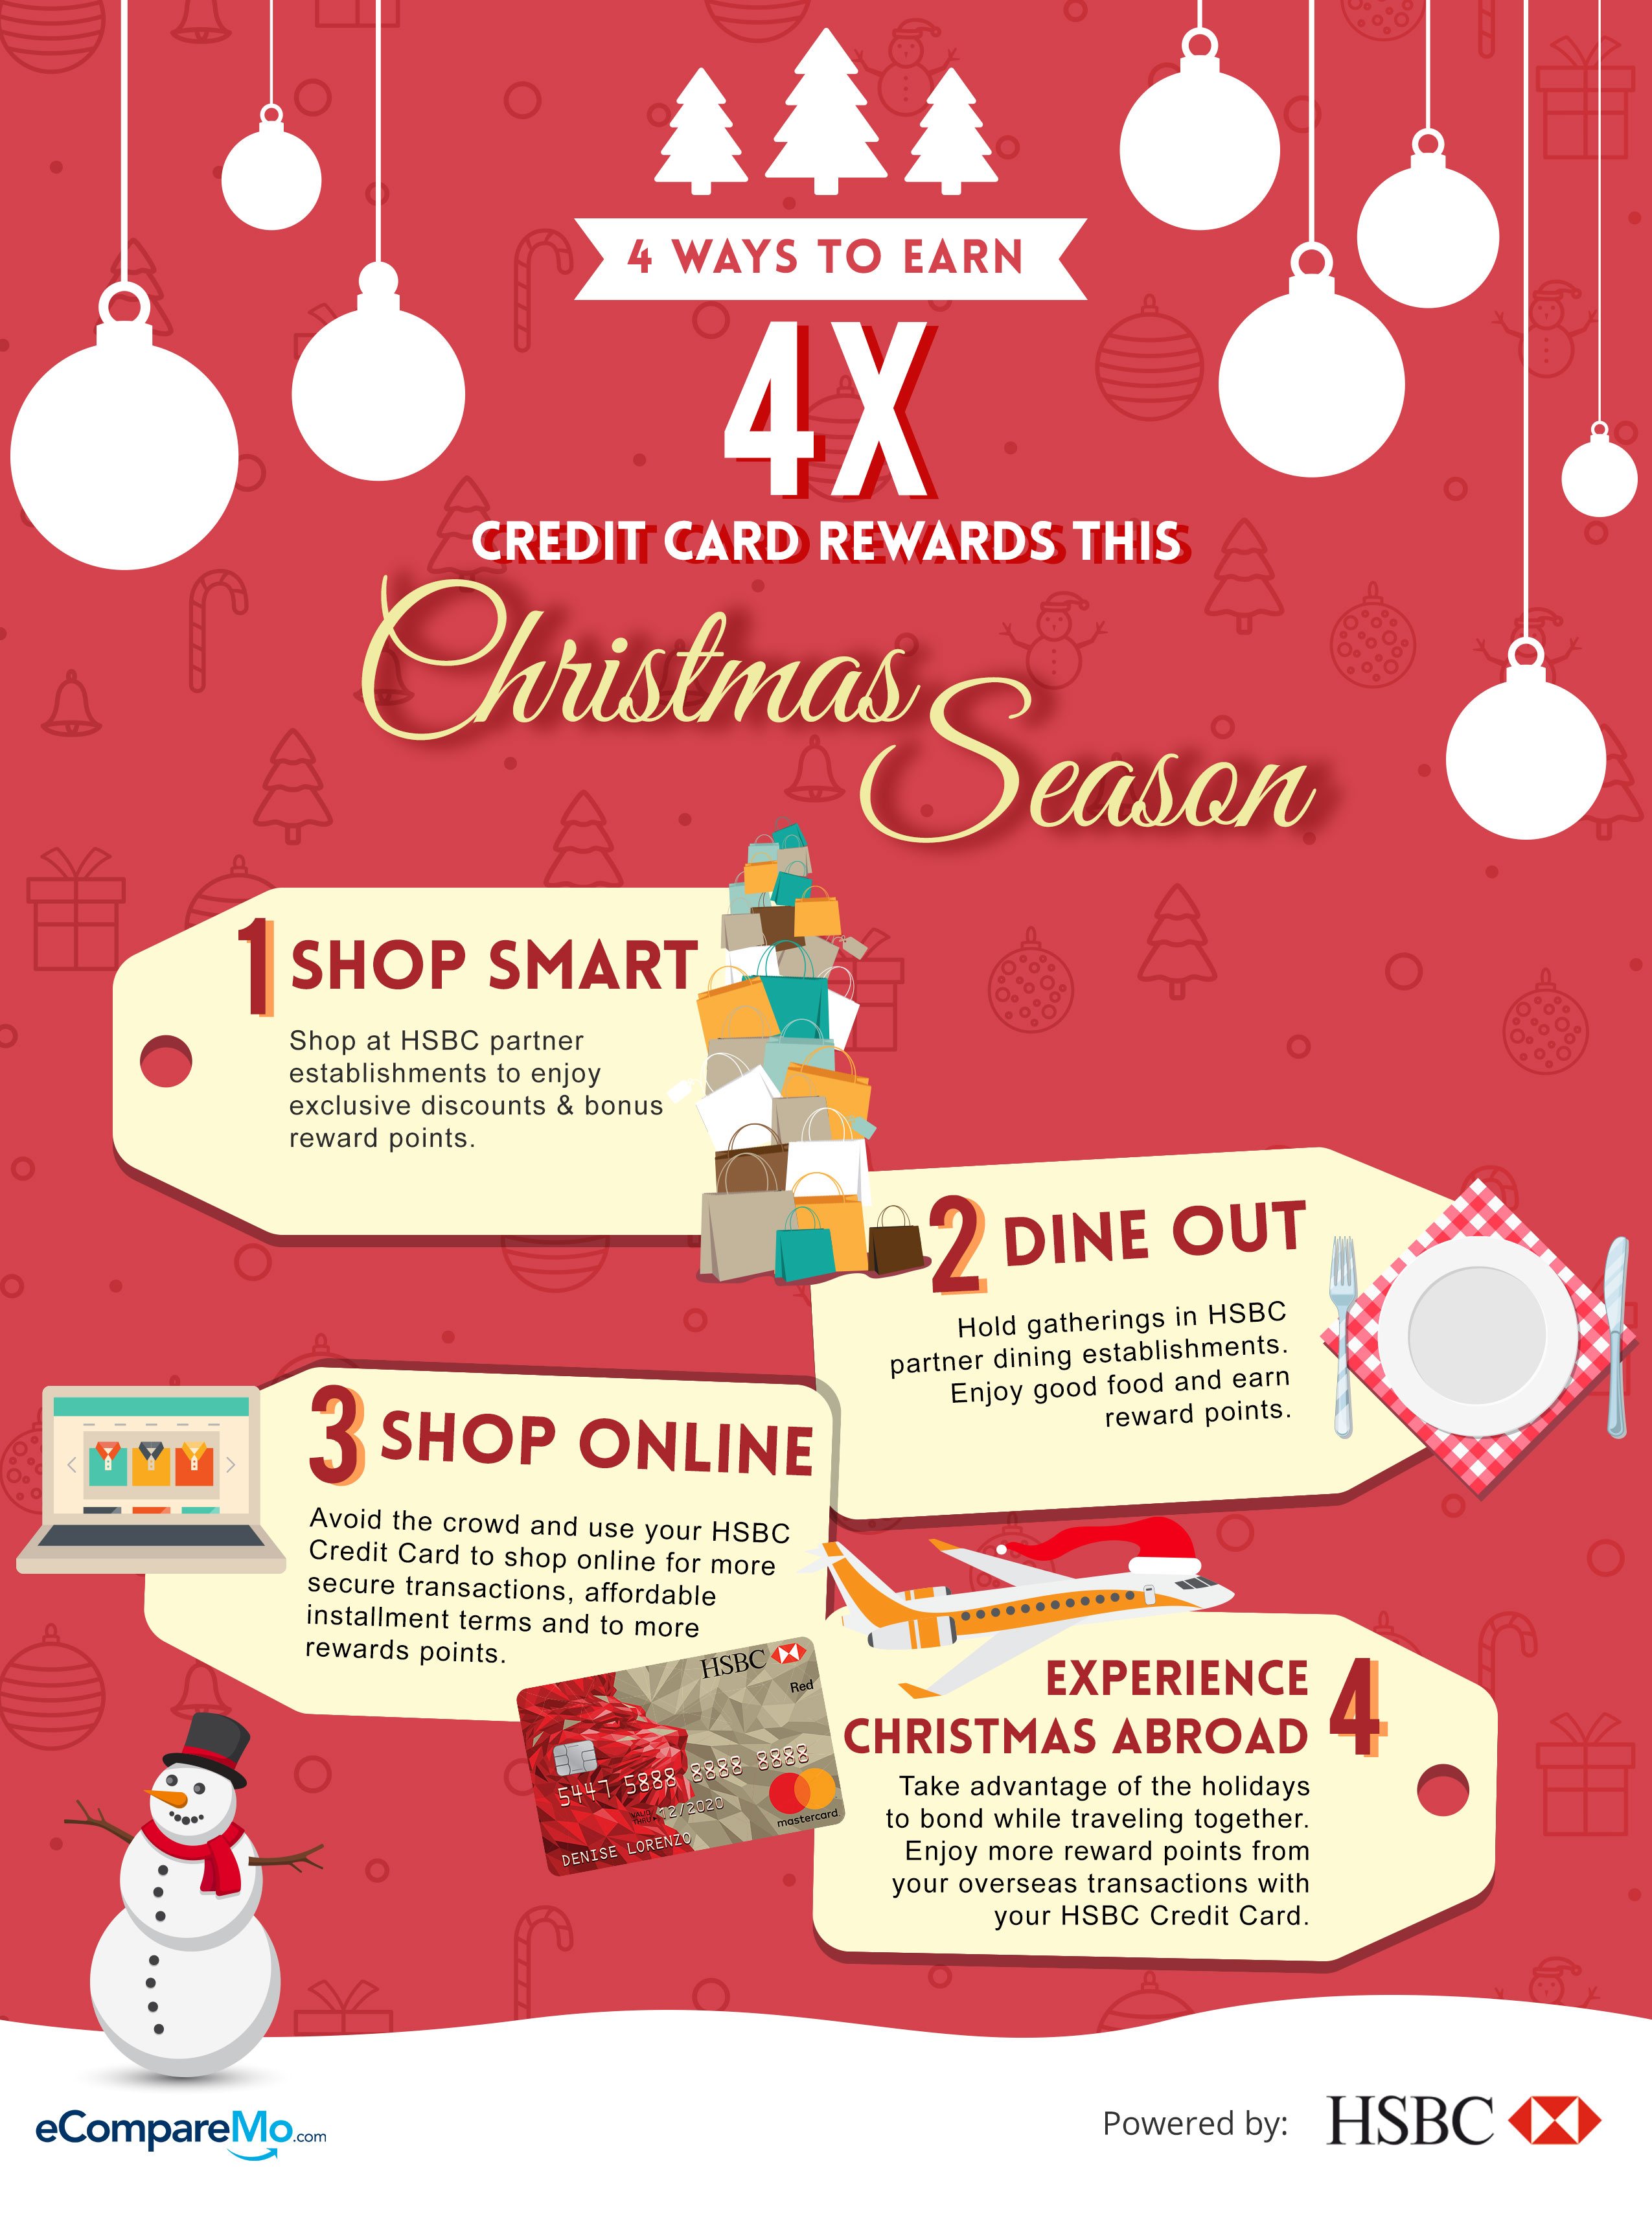 4 Smart Tricks To Earn Up To 4X The Rewards During The Christmas Season